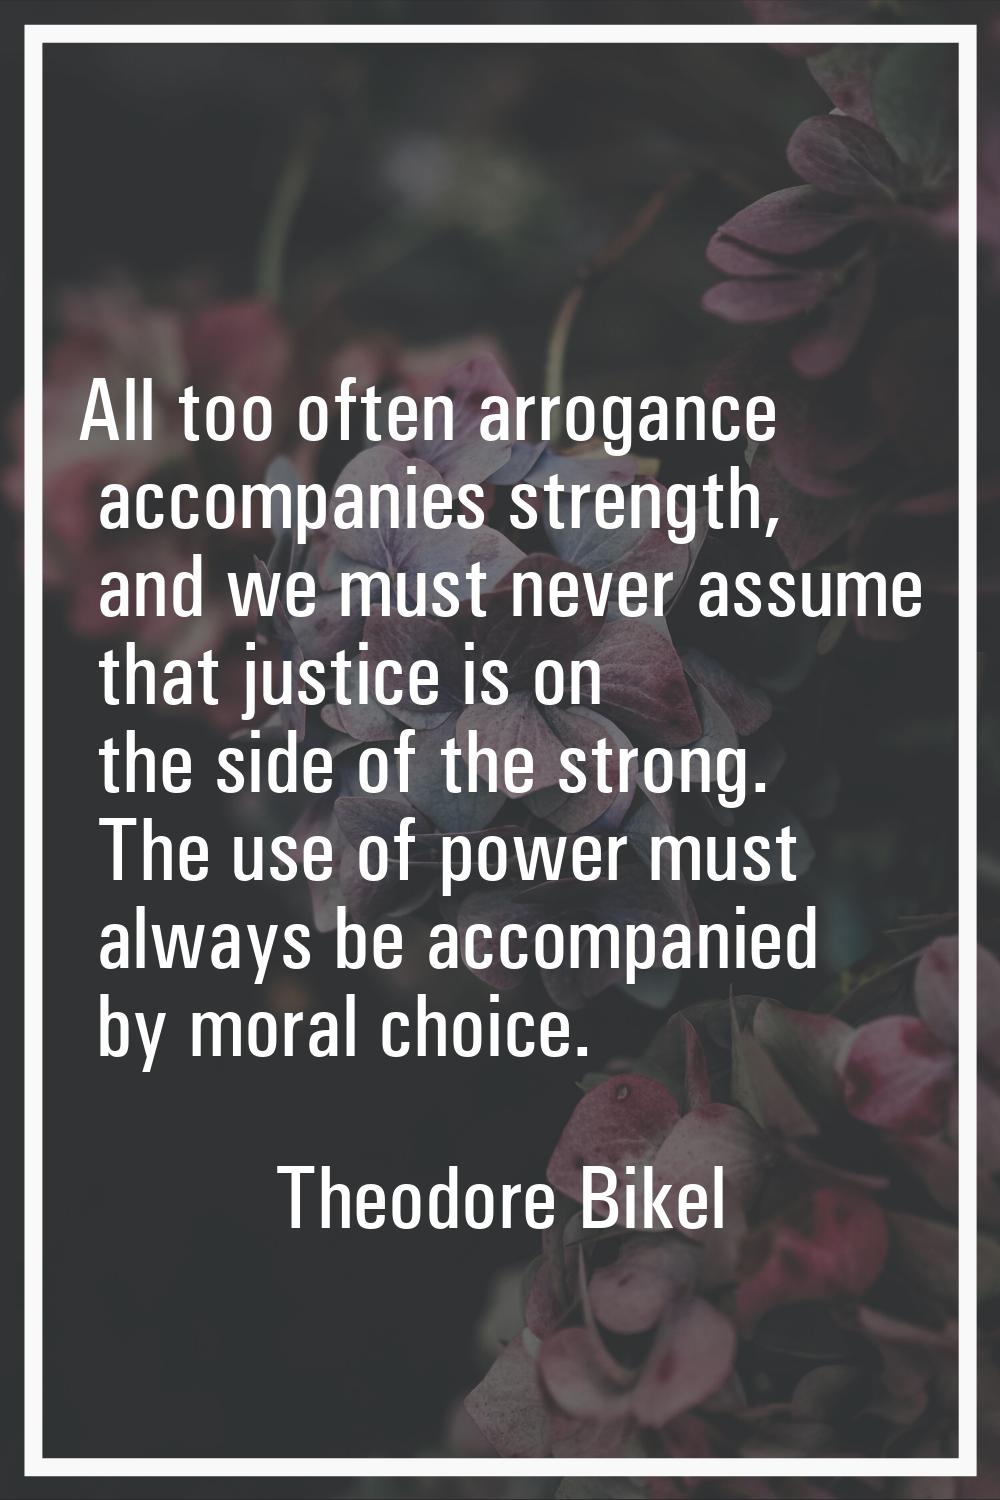 All too often arrogance accompanies strength, and we must never assume that justice is on the side 